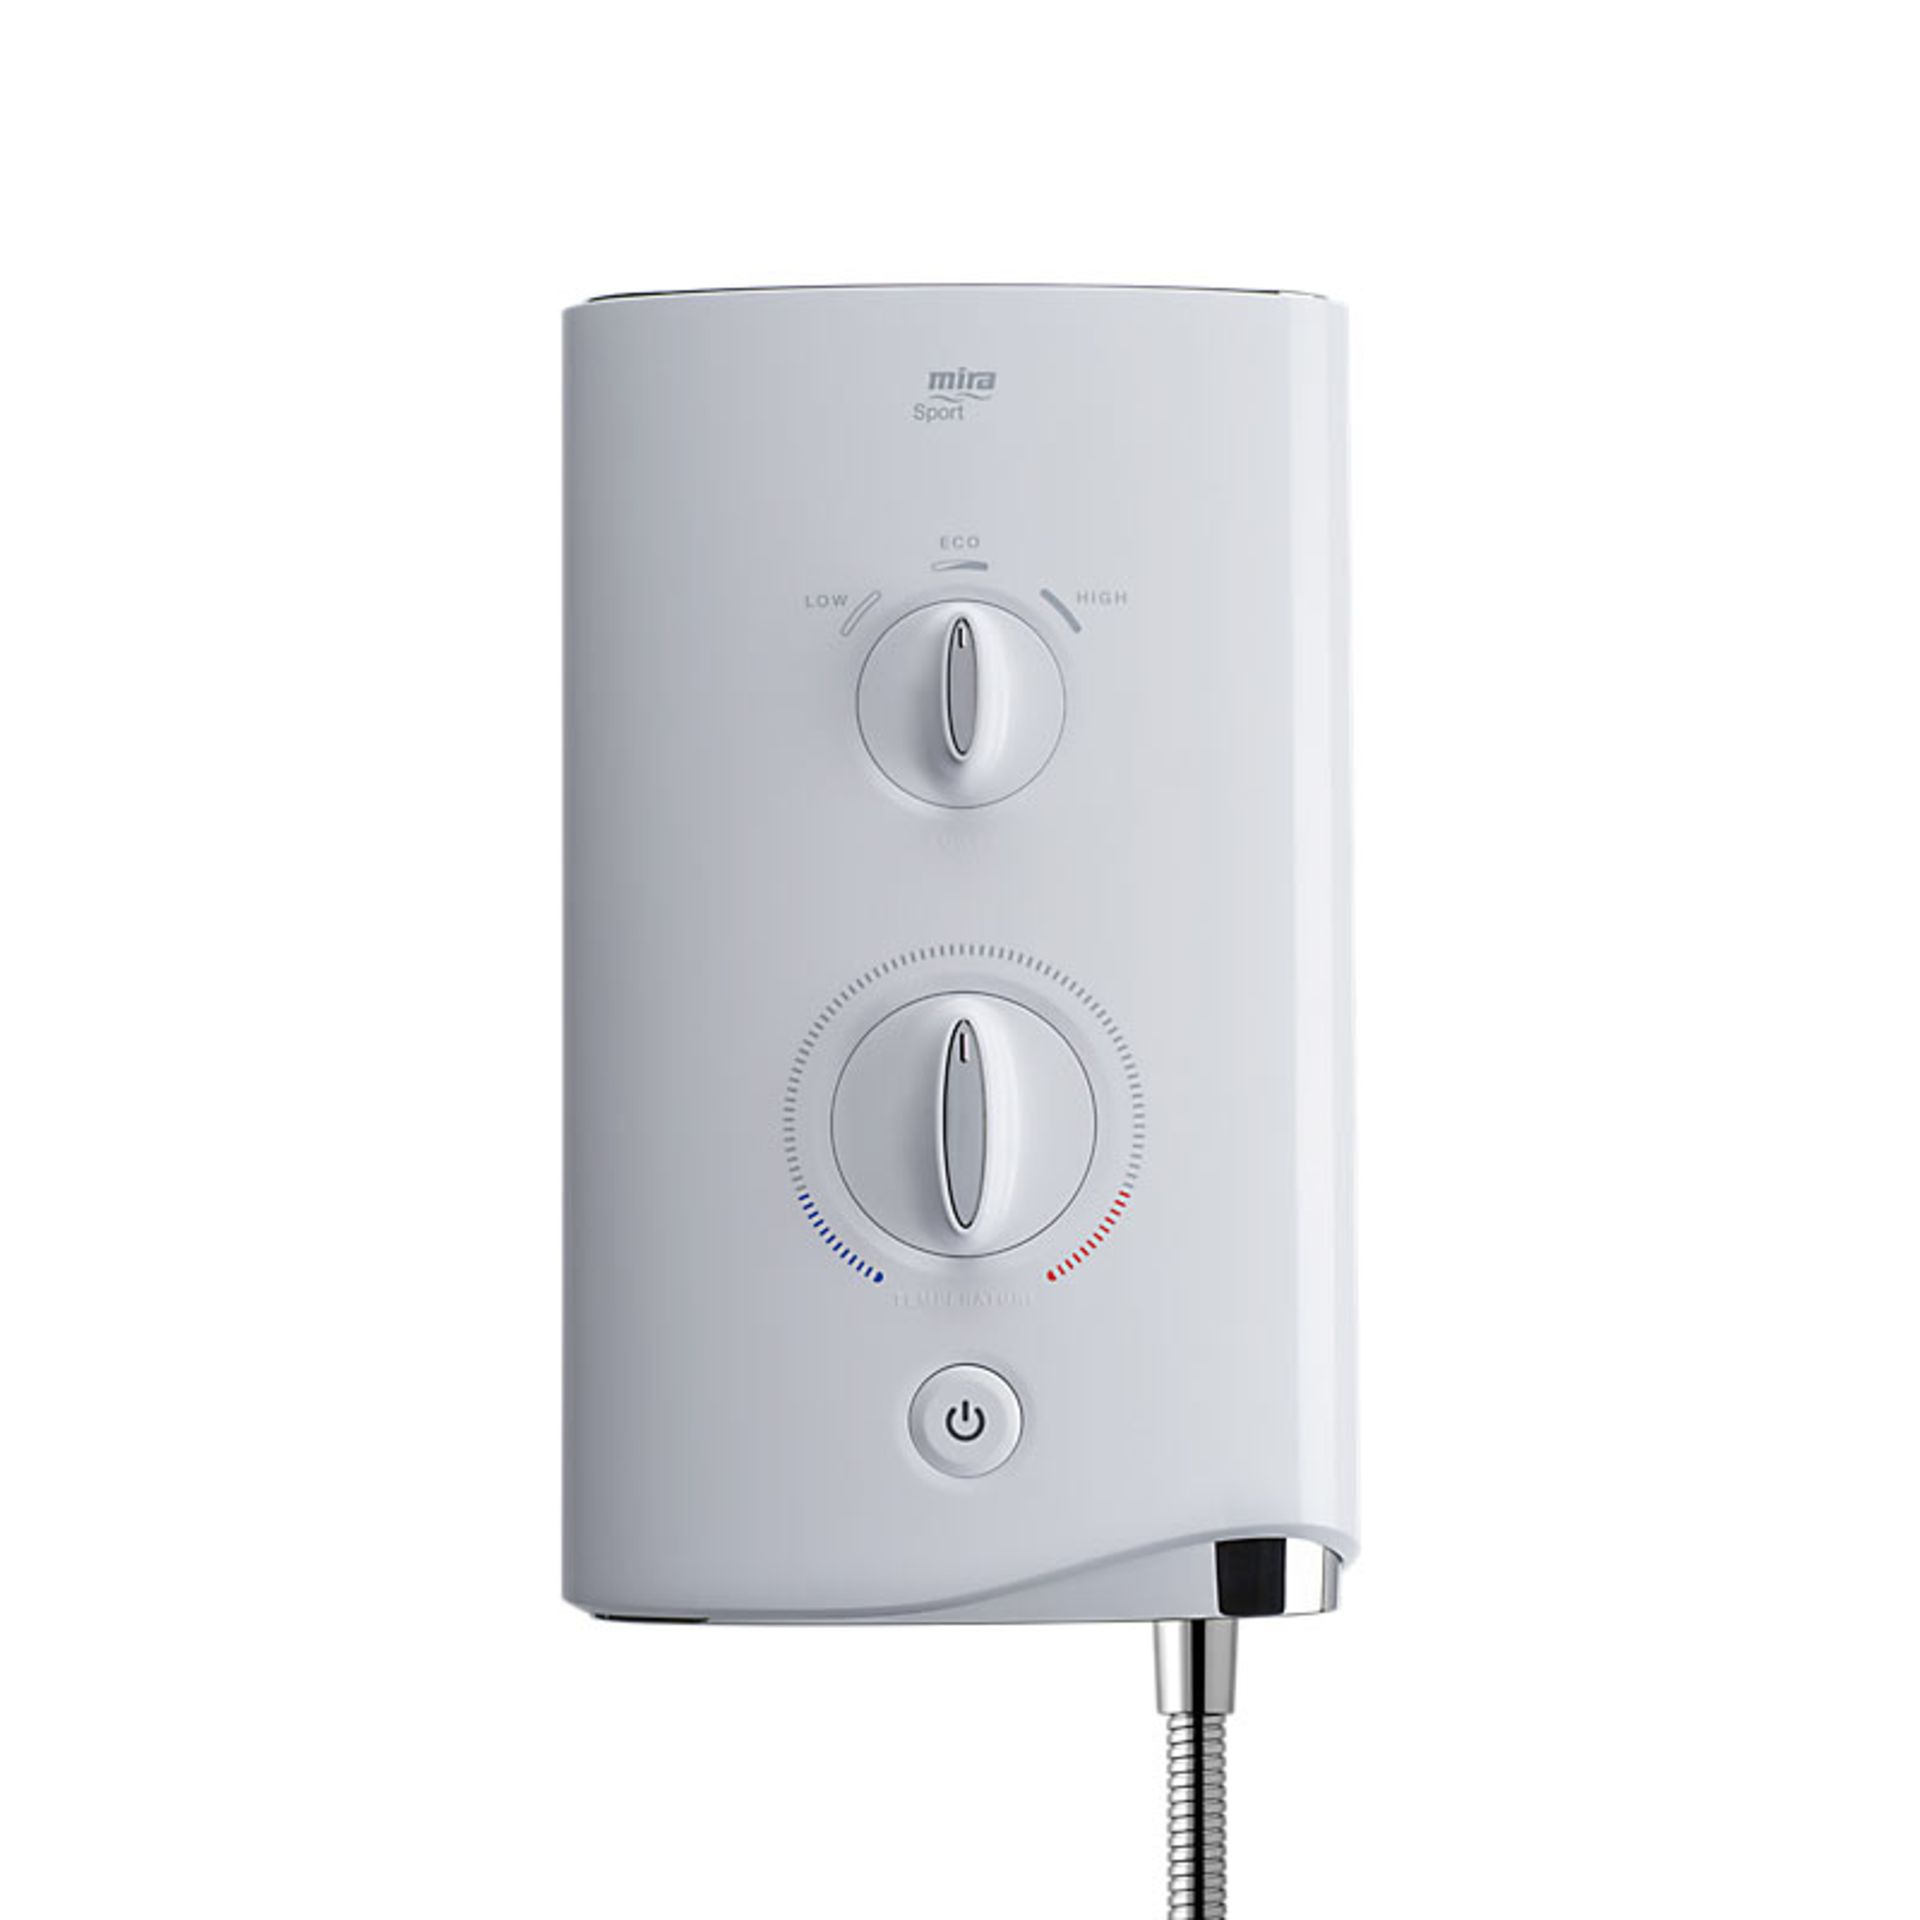 1 x Mira Sport Thermostatic White and Chrome 9.0kW Electric Shower - New Boxed Stock - RRP: £320 - Image 5 of 5